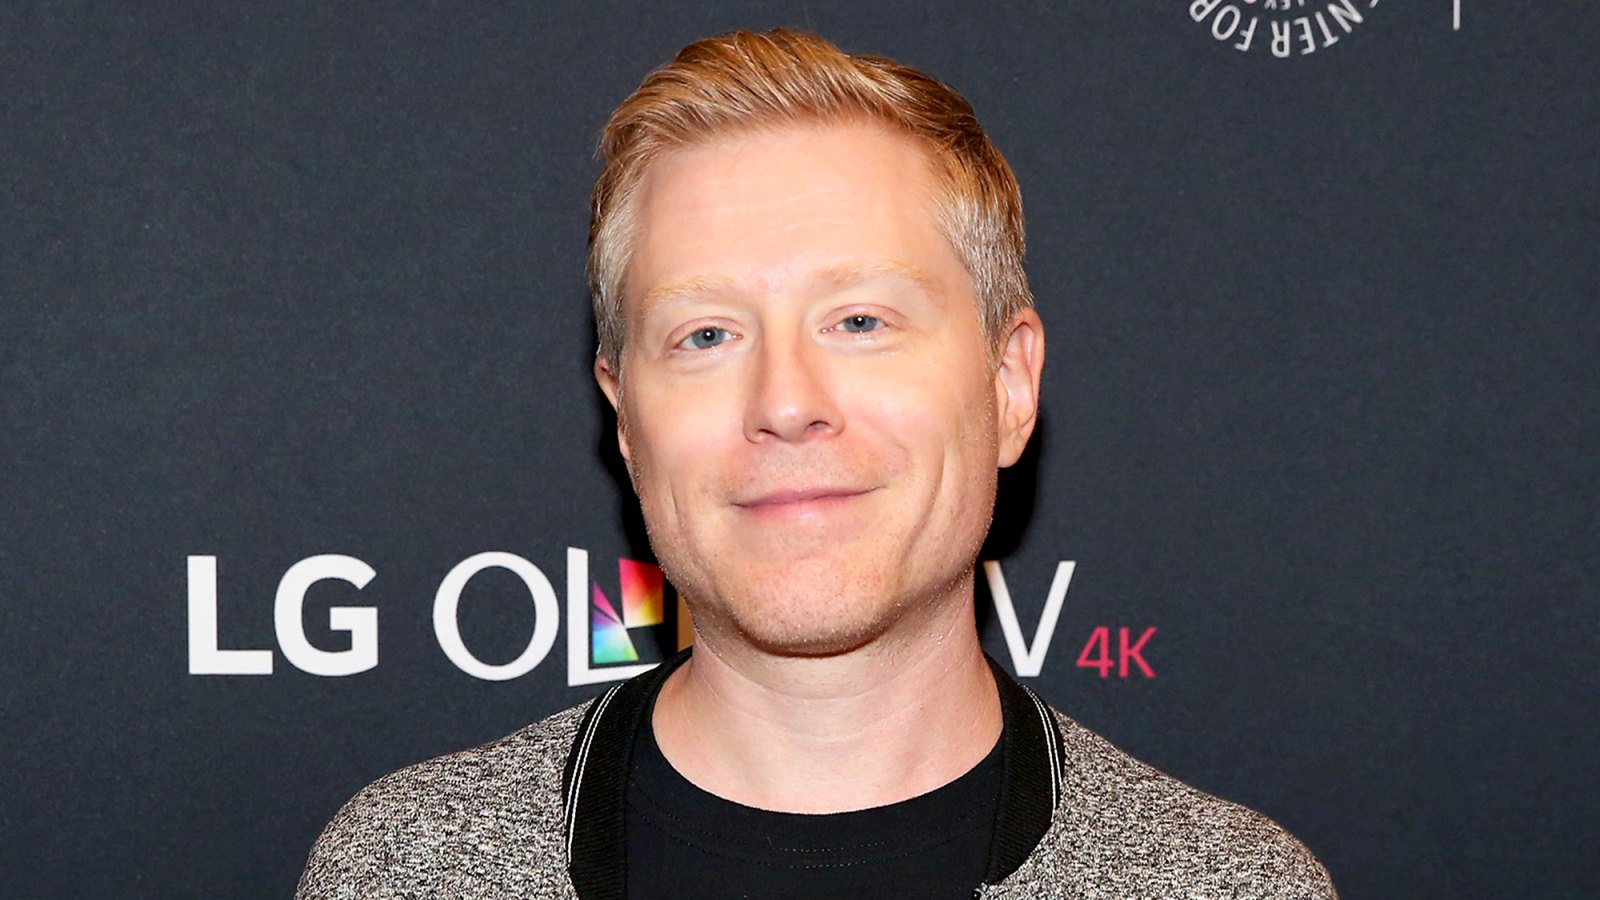 Anthony Rapp attends "Star Trek: Discovery" at The Paley Center for Media on October 7, 2017 in New York City.